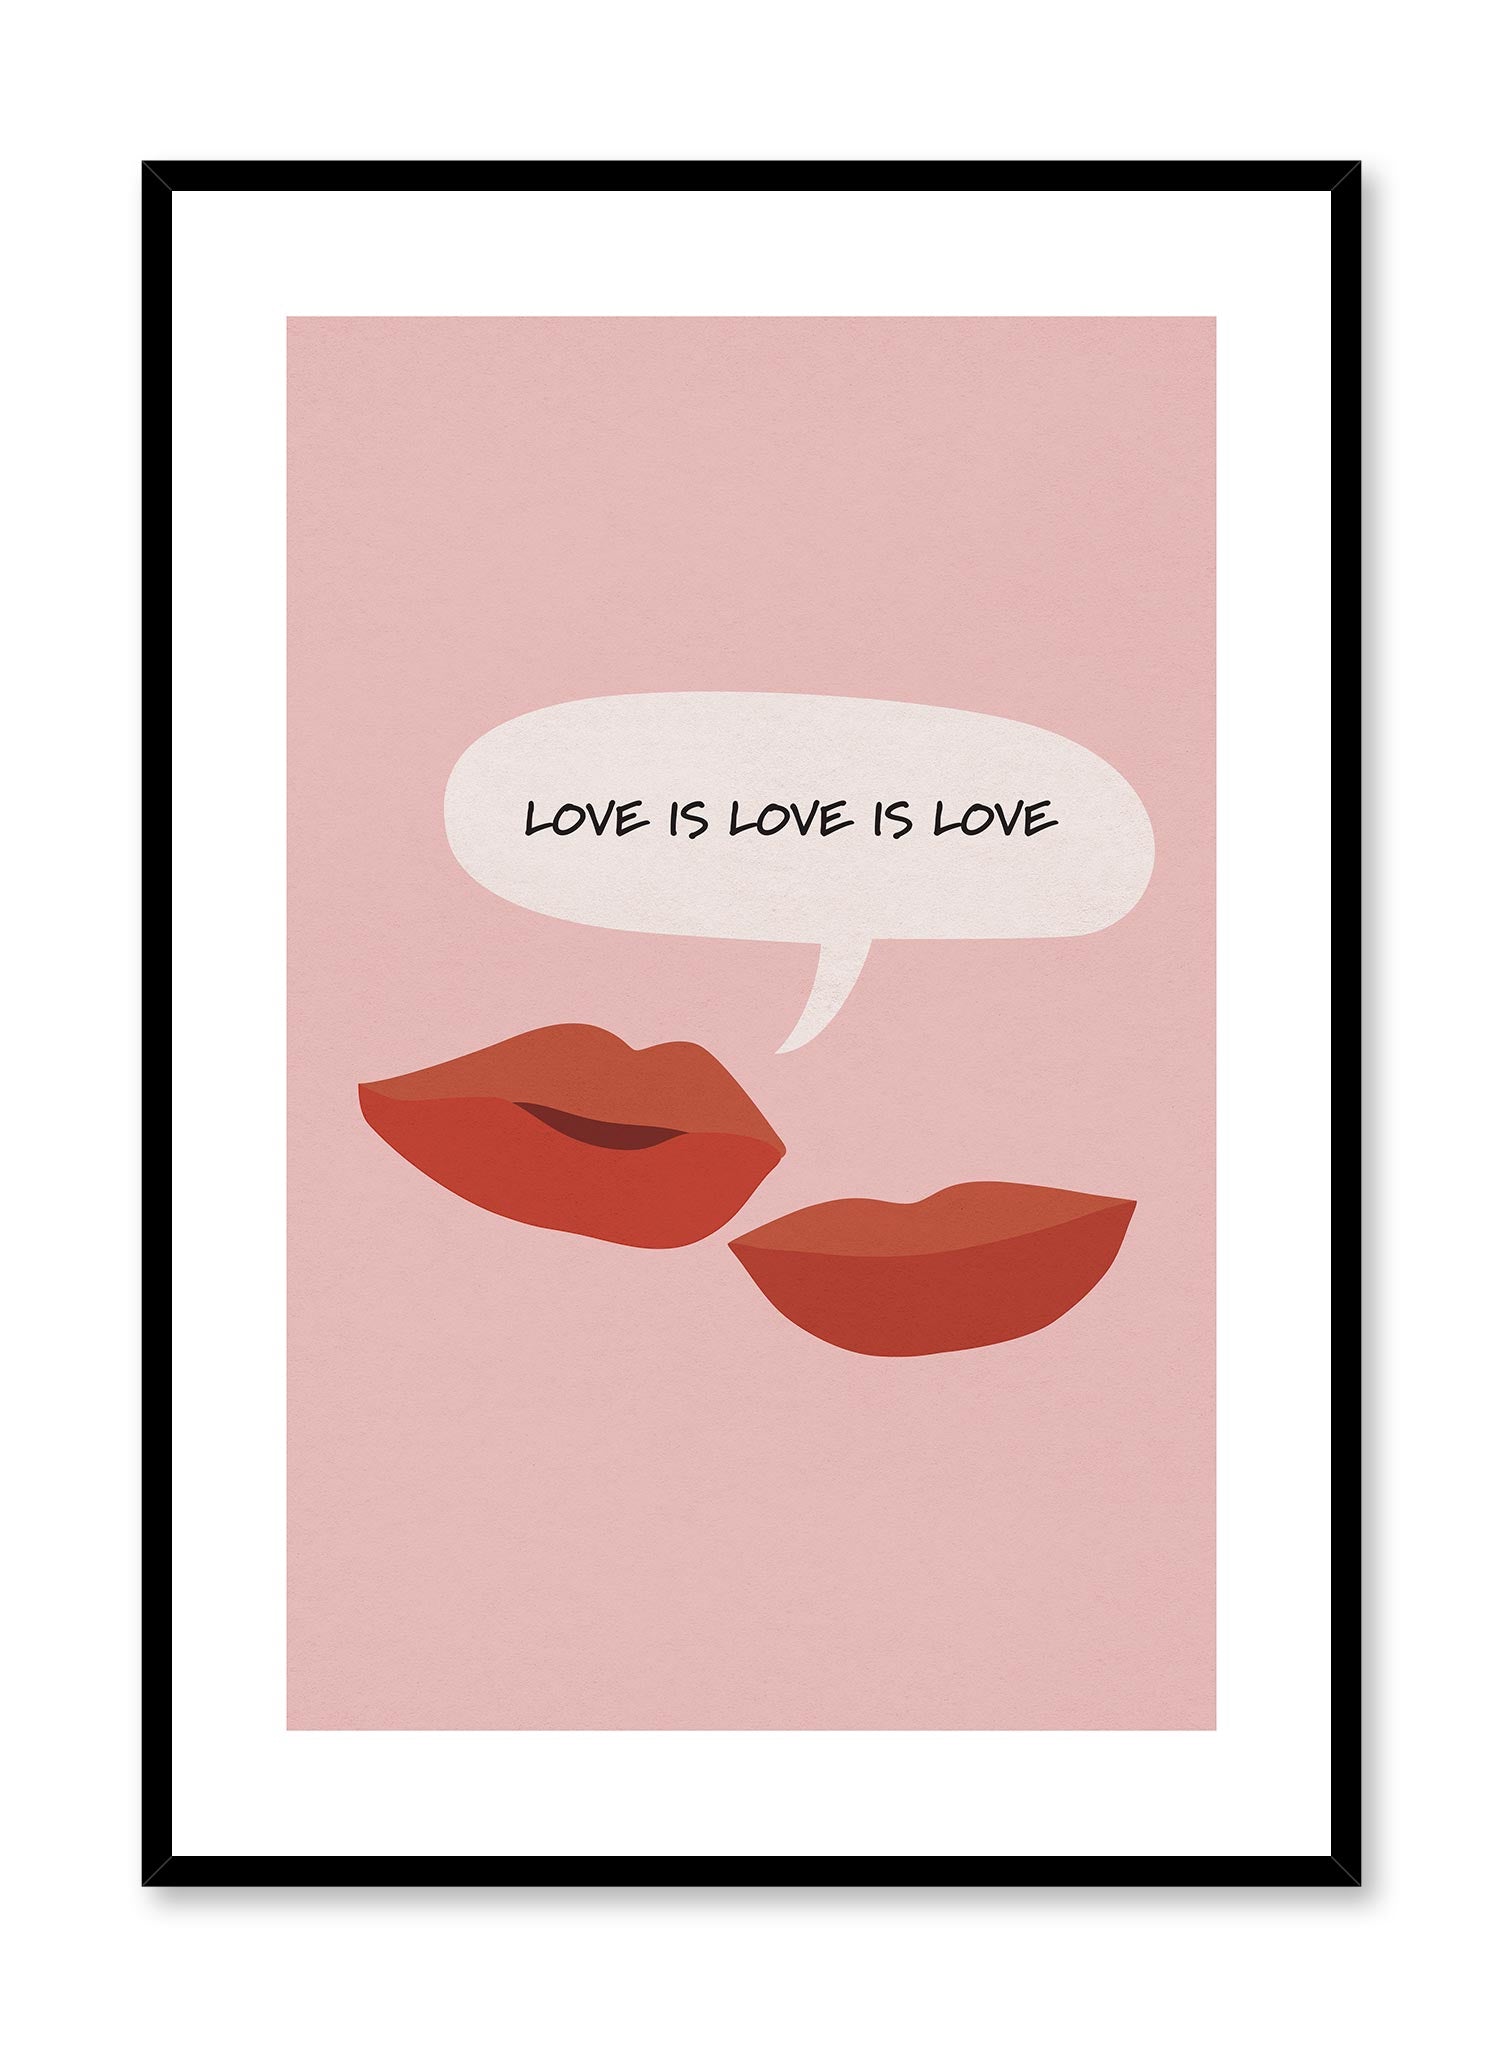 Love is Love is a minimalist typography by Opposite Wall of a pair of lips telling another that "Love is love is love" in a speech bubble. 